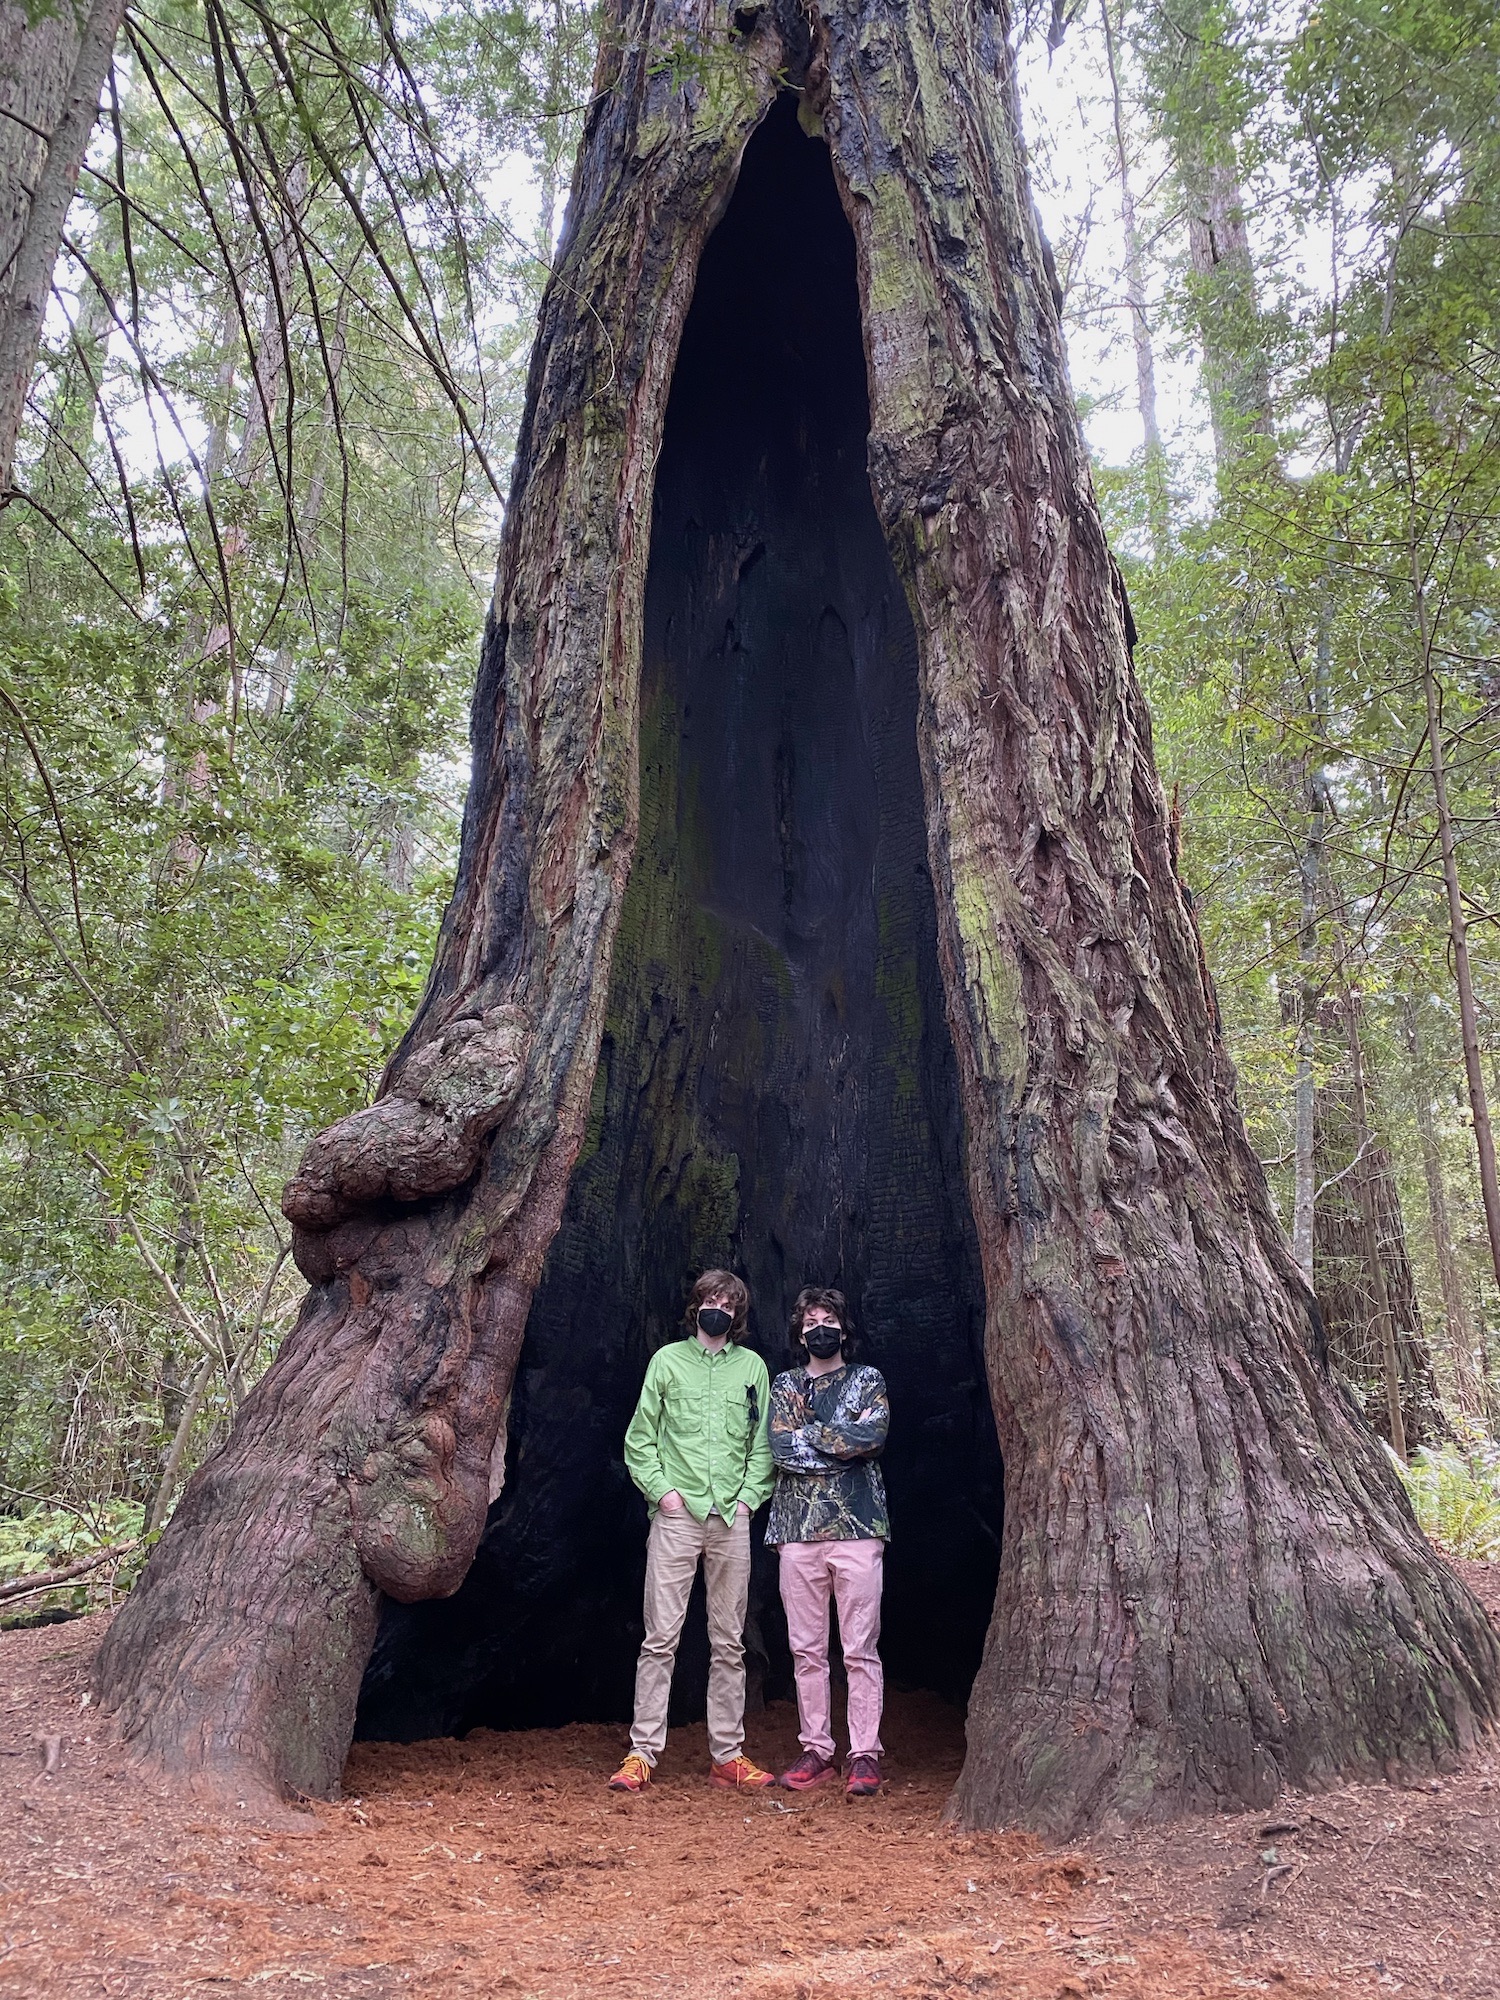 Sammy and me standing inside of a hollow redwood tree.